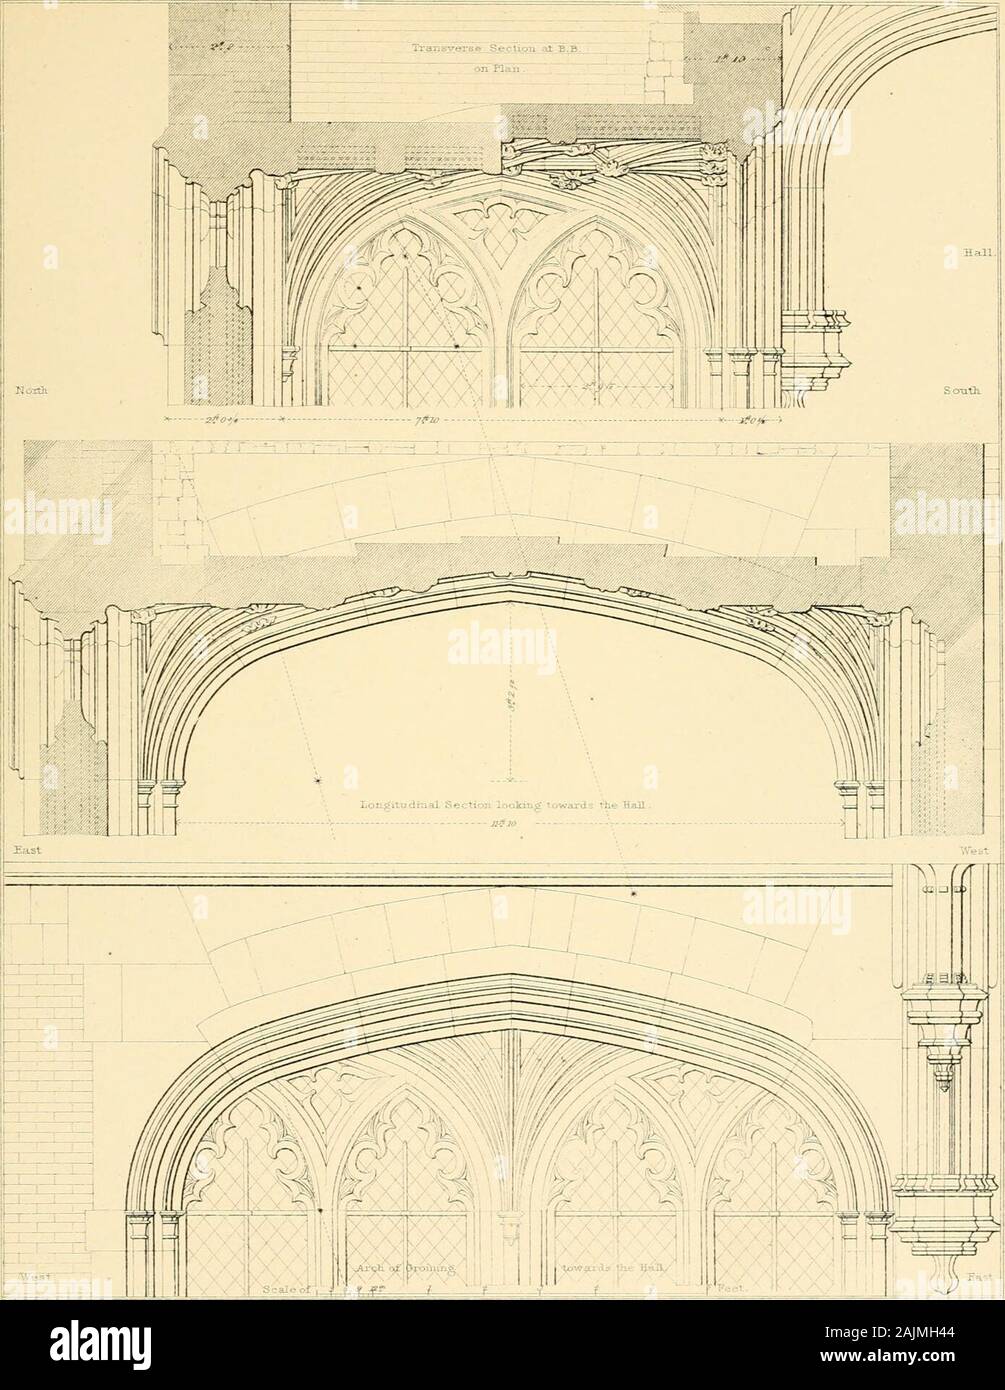 Examples of Gothic architecture : selected from various ancient edifices in England ; consisting of plans, elevations, sections, and parts at large ; calculated to exemplify the various styles and the practical construction of this admired class of architecture ; accompanied by historical and descriptive accounts . APu^m, Ajch* direx Drawn by TXBurv- . - n (yladwin. sciilp*. GROINING OF BAY WINDOW^ ON THE NORTH SIDE OF HAIL. UOIiffESTIC ARCHITECTTDIE.K.. A.Ptt^iu, AtcTi* direi* Drarwn by T.T.Biiry. G.Gladwin.sc?^lp^ 3SXj3riBCAEfi JF-^JLj^G JEs 3iLTS2T-.T- G-K-OINING OF BAY VJNDOVf ONT THE -NOR Stock Photo